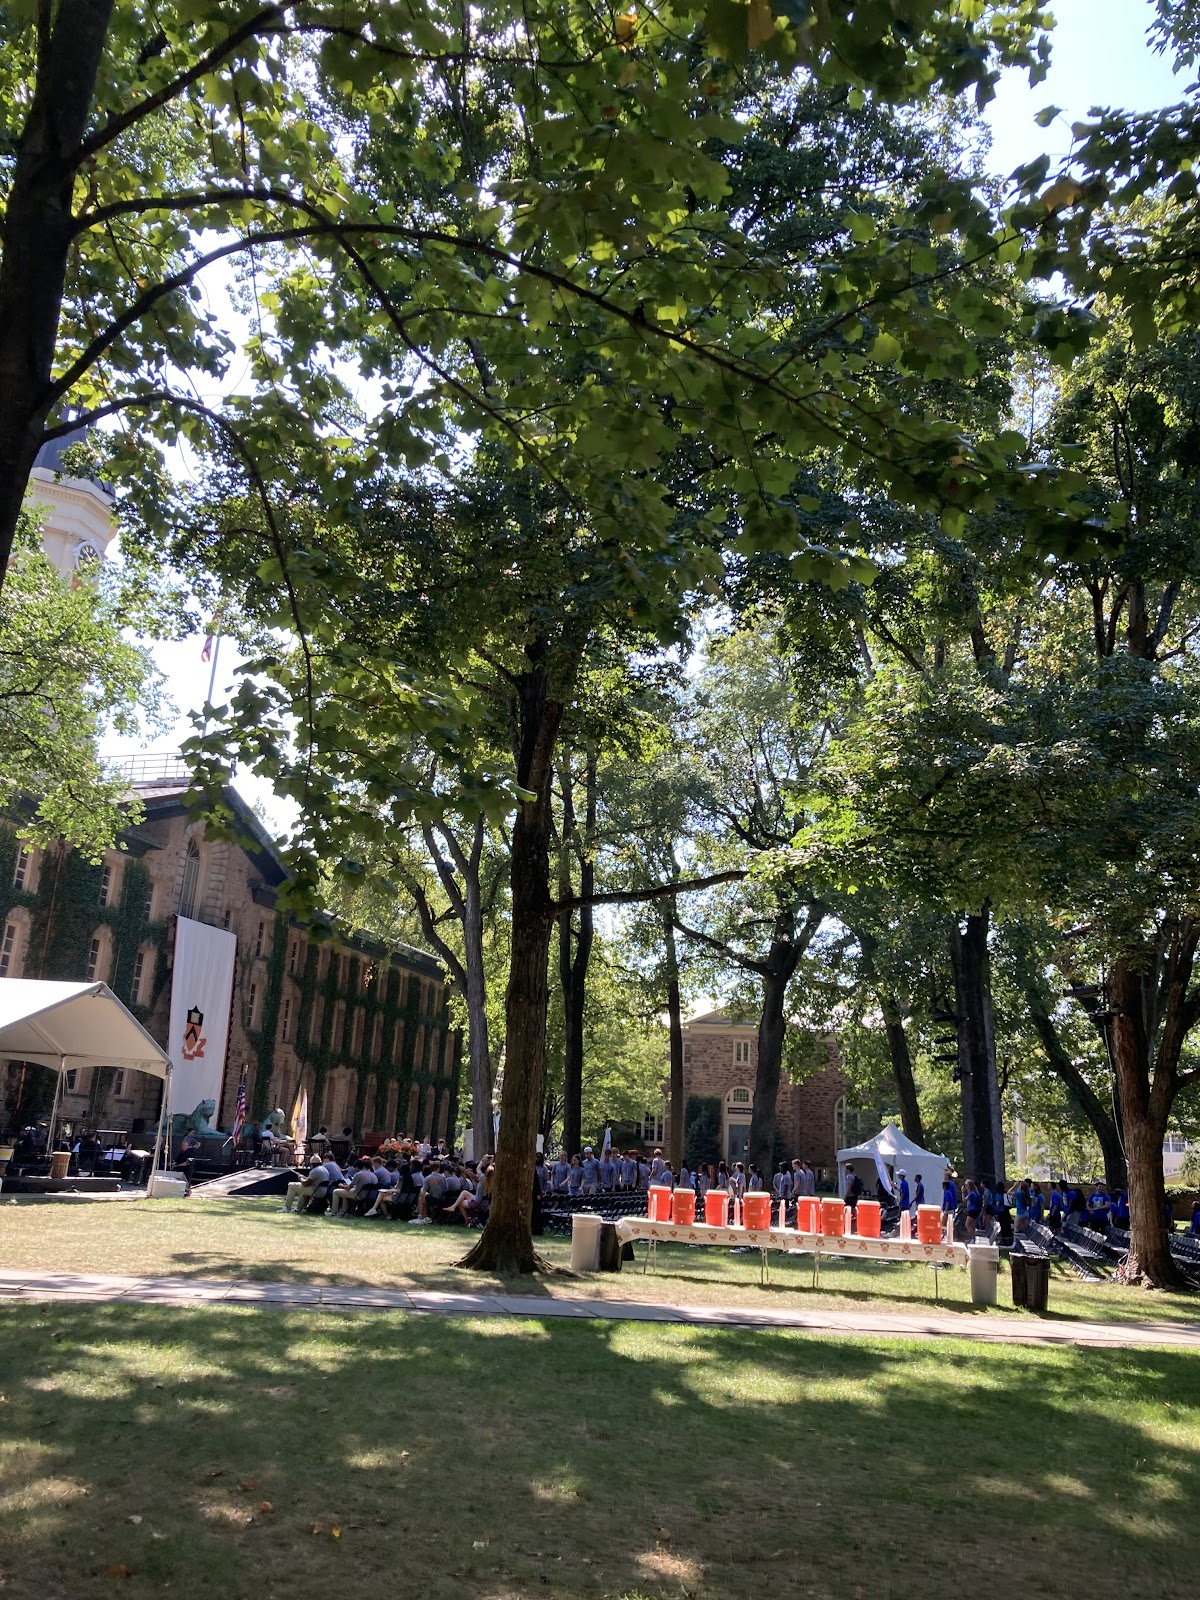 Large audience is seated in chairs set up under trees in front of pre-revolutionary building (Nassau Hall)